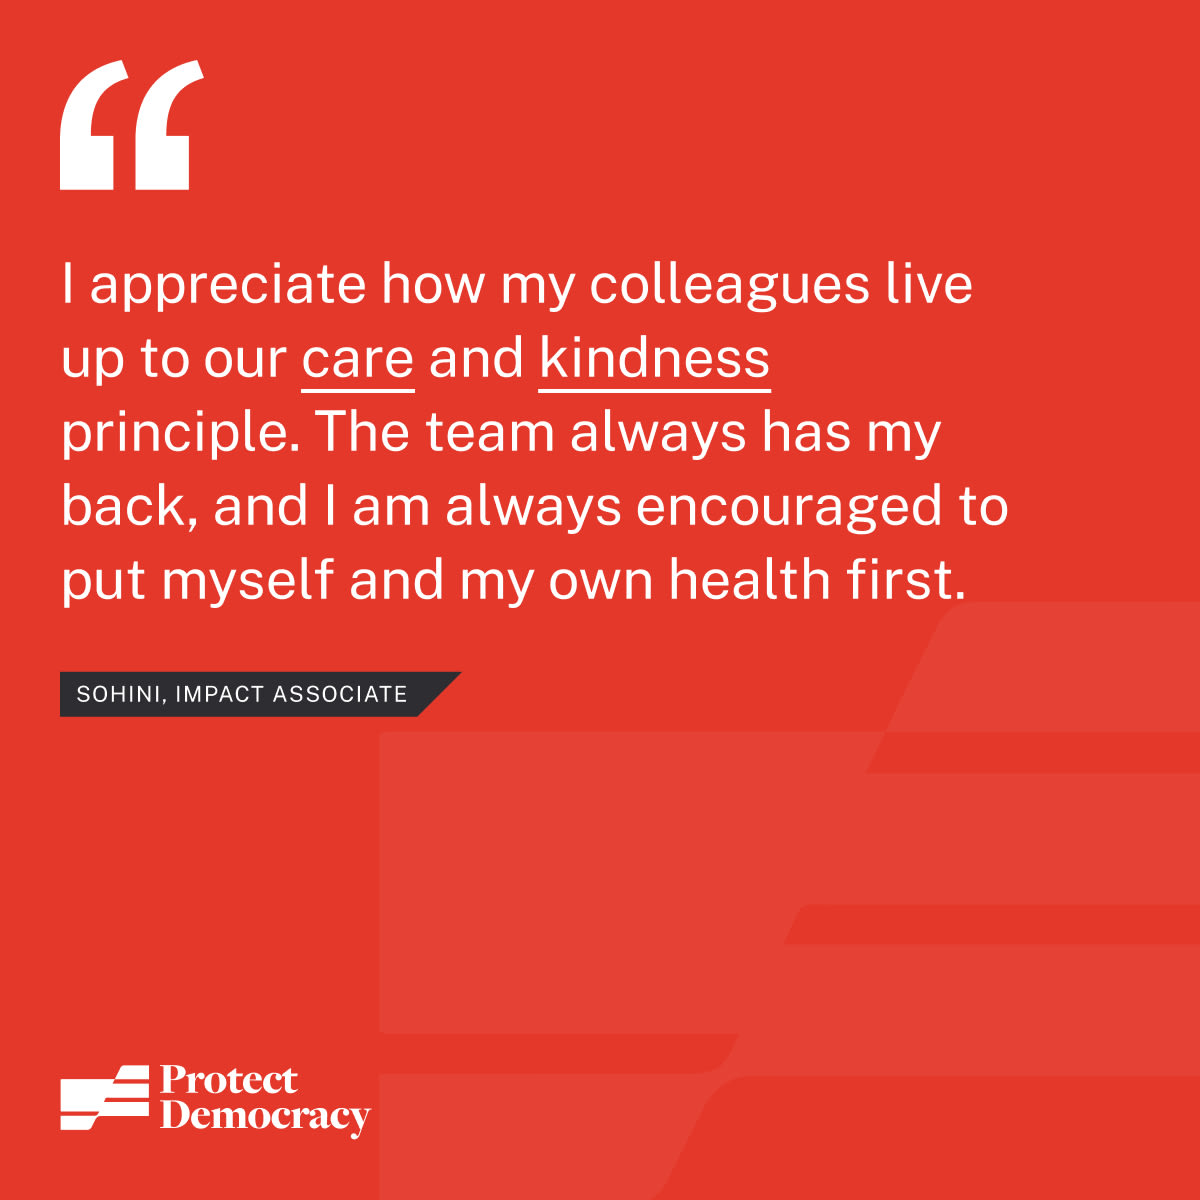 “I appreciate how my colleagues live up to our care and kindness principle. The team always has my back, and I am always encouraged to put myself and my own health first.” - Sohini, Impact Associate